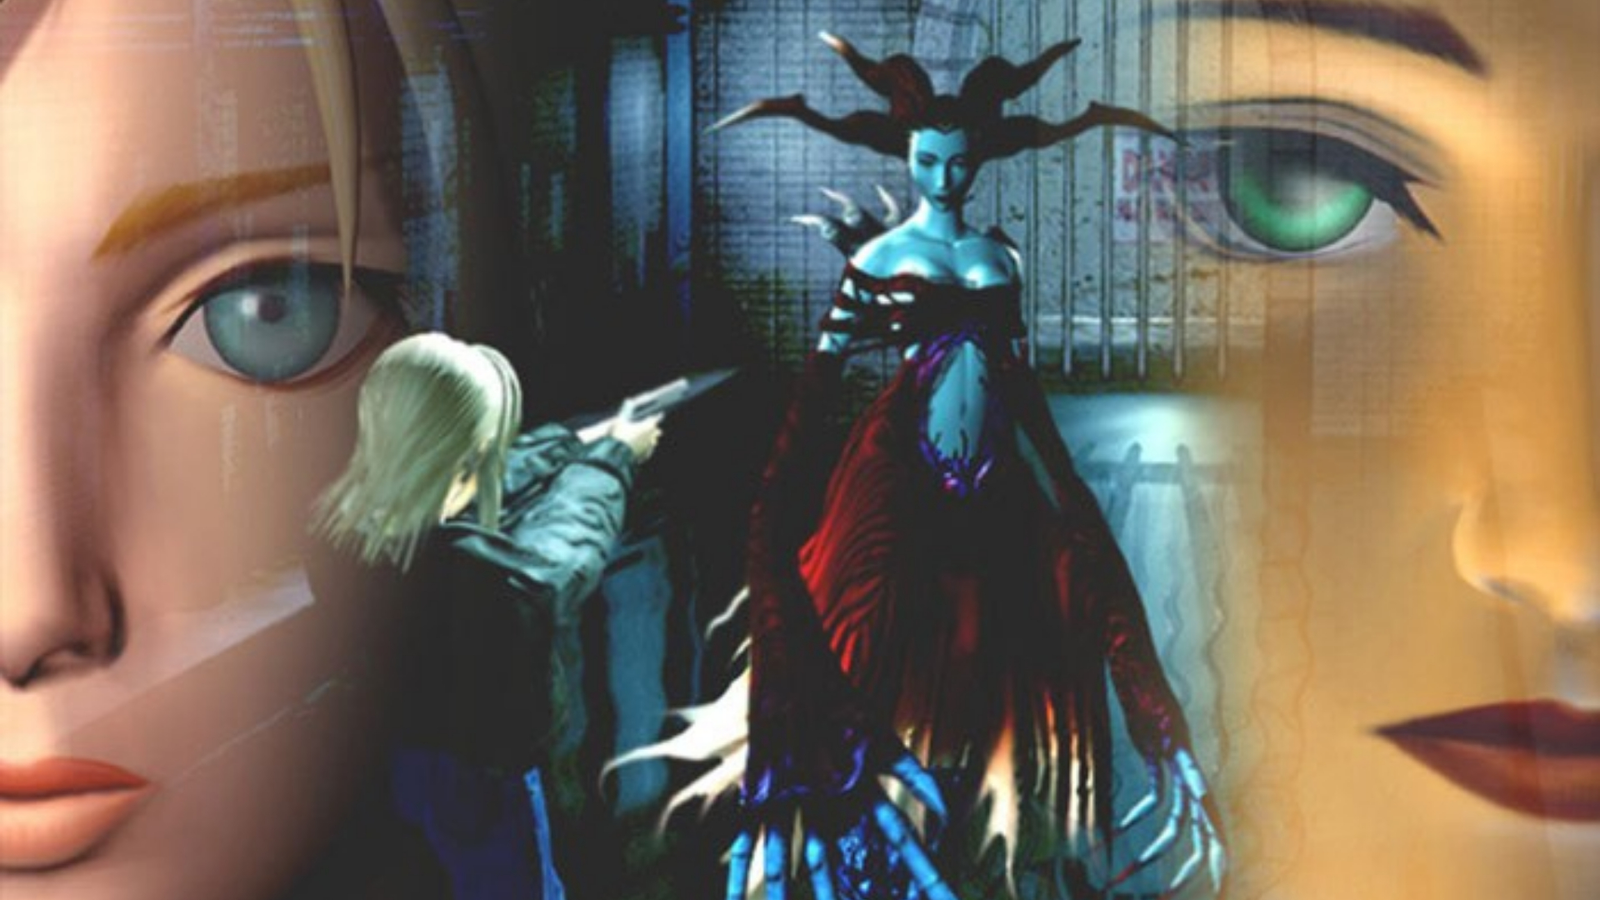 Parasite Eve Deserves a New Game From Square Enix